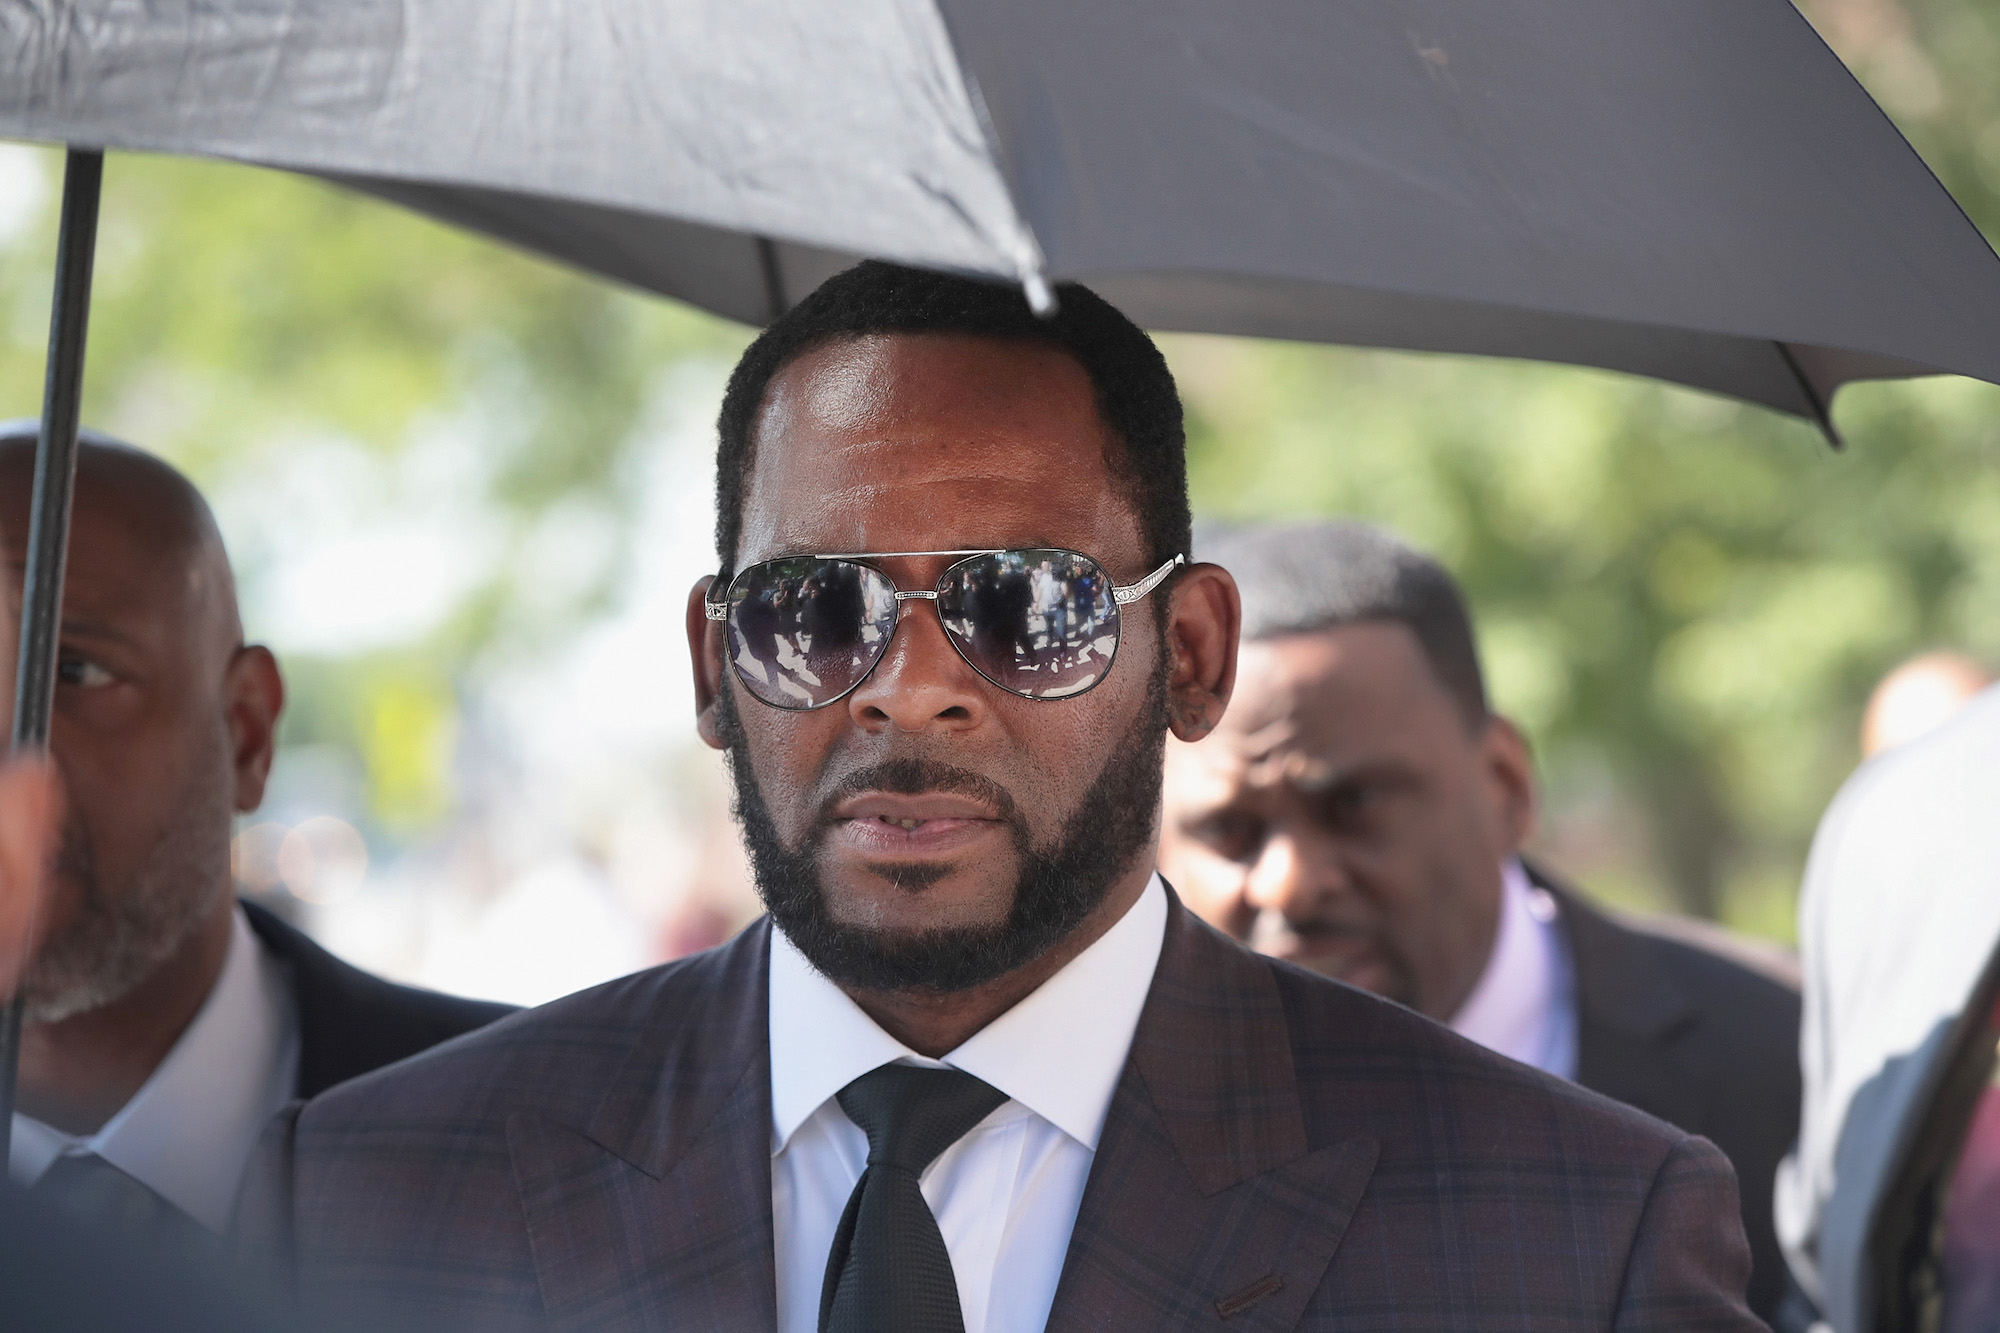 R. Kelly stands under an umbrella outside the courthouse